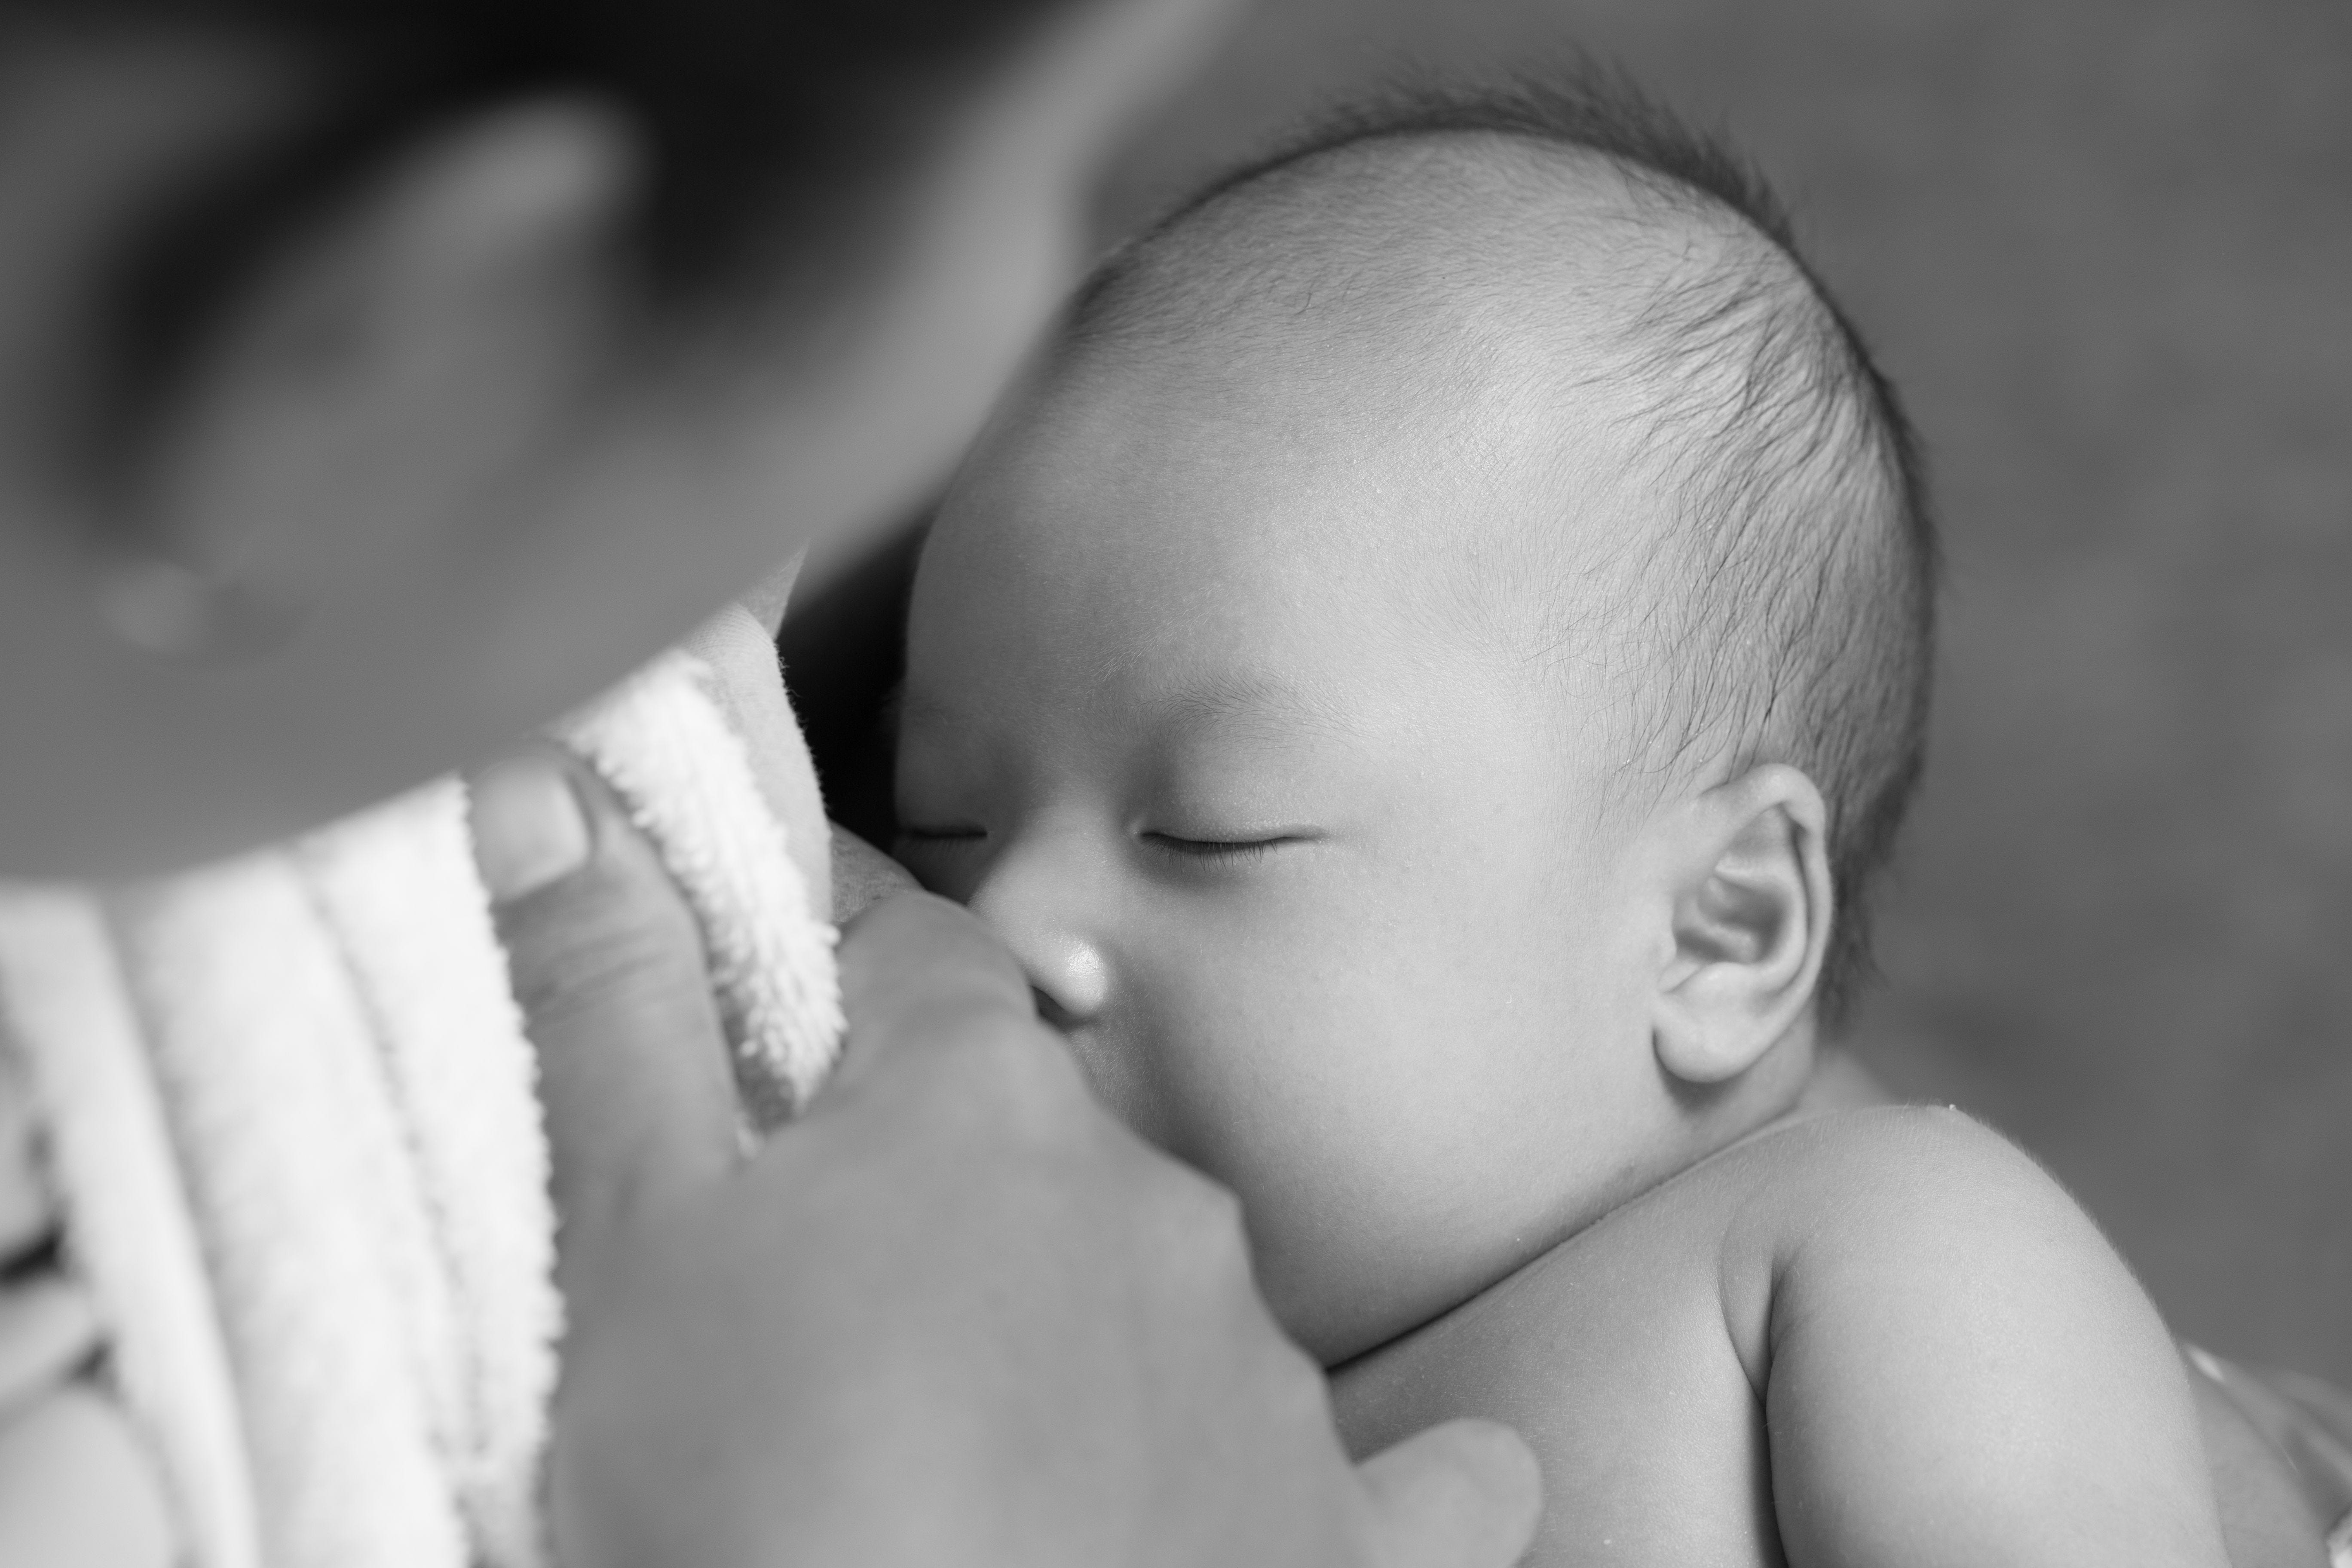 Study says breastfeeding could lower mom's risk of heart disease, stroke